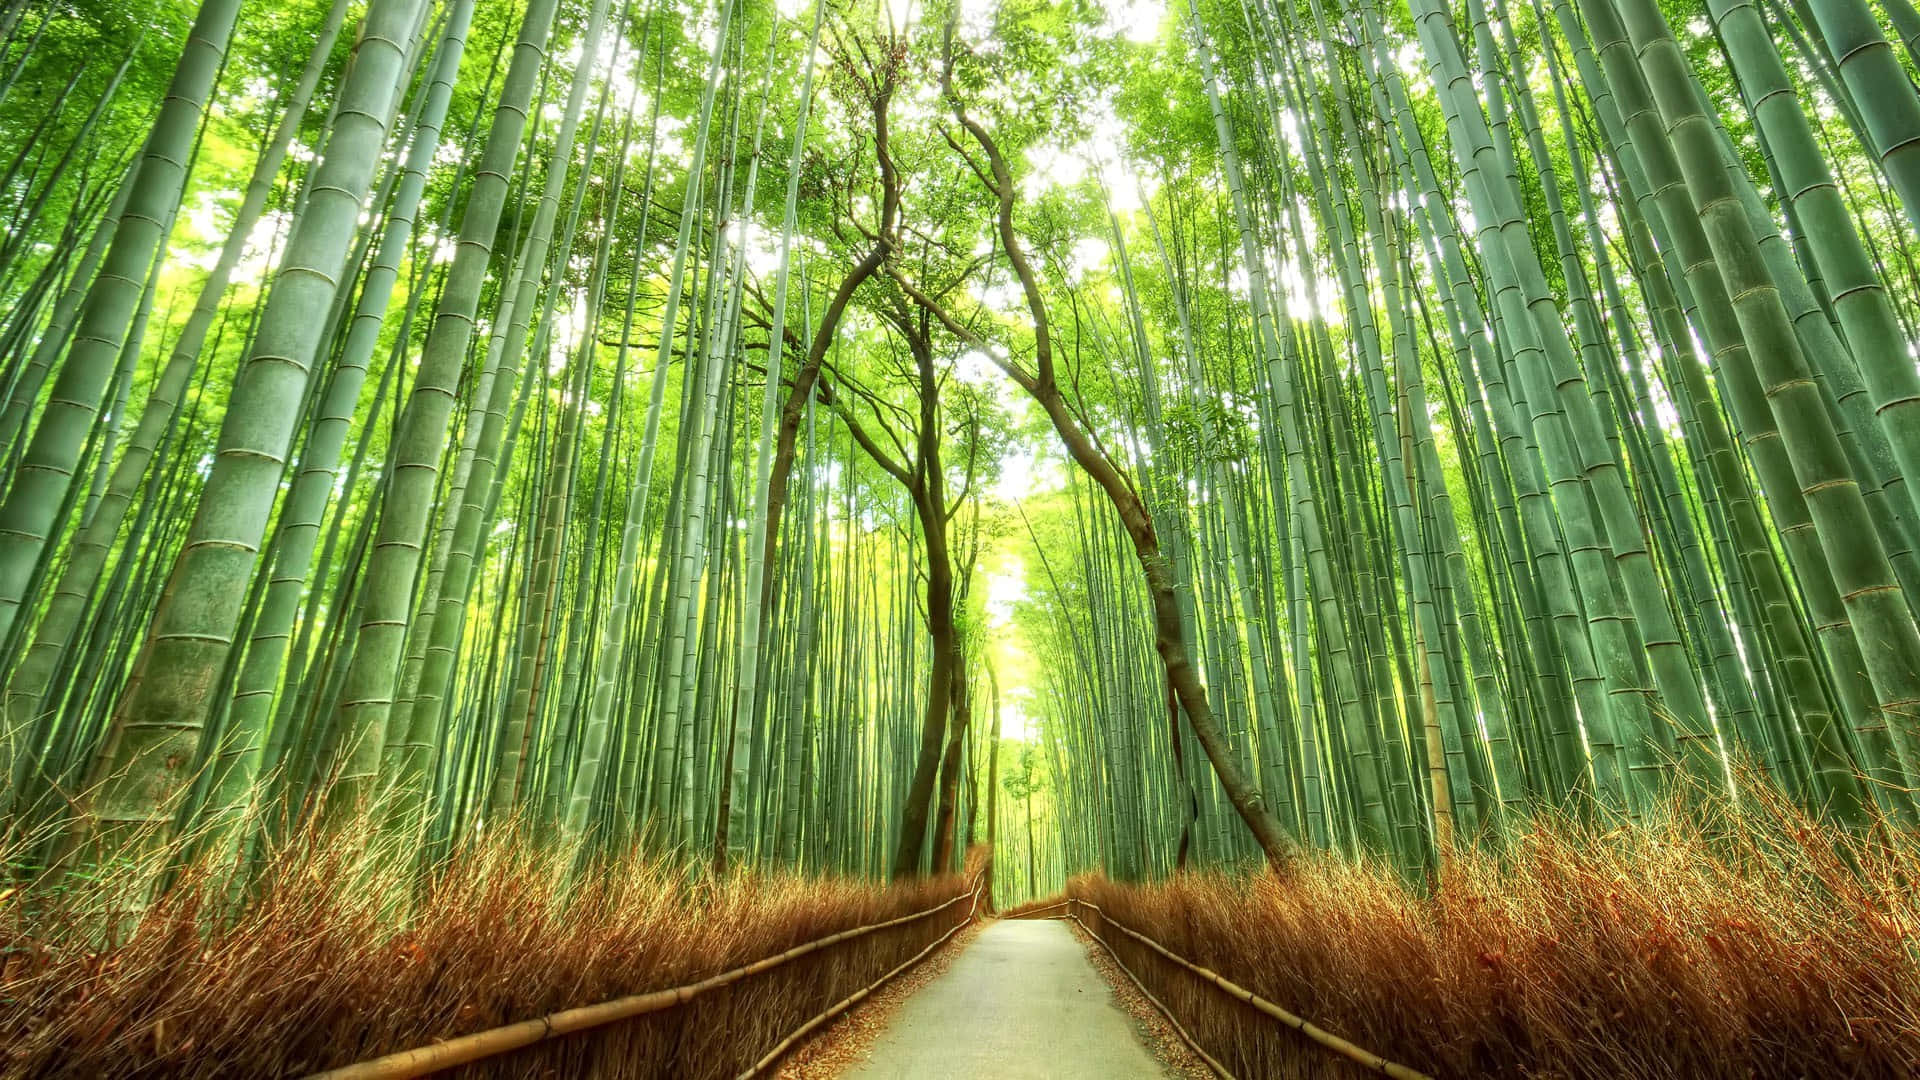 A Pathway Through A Bamboo Forest Background